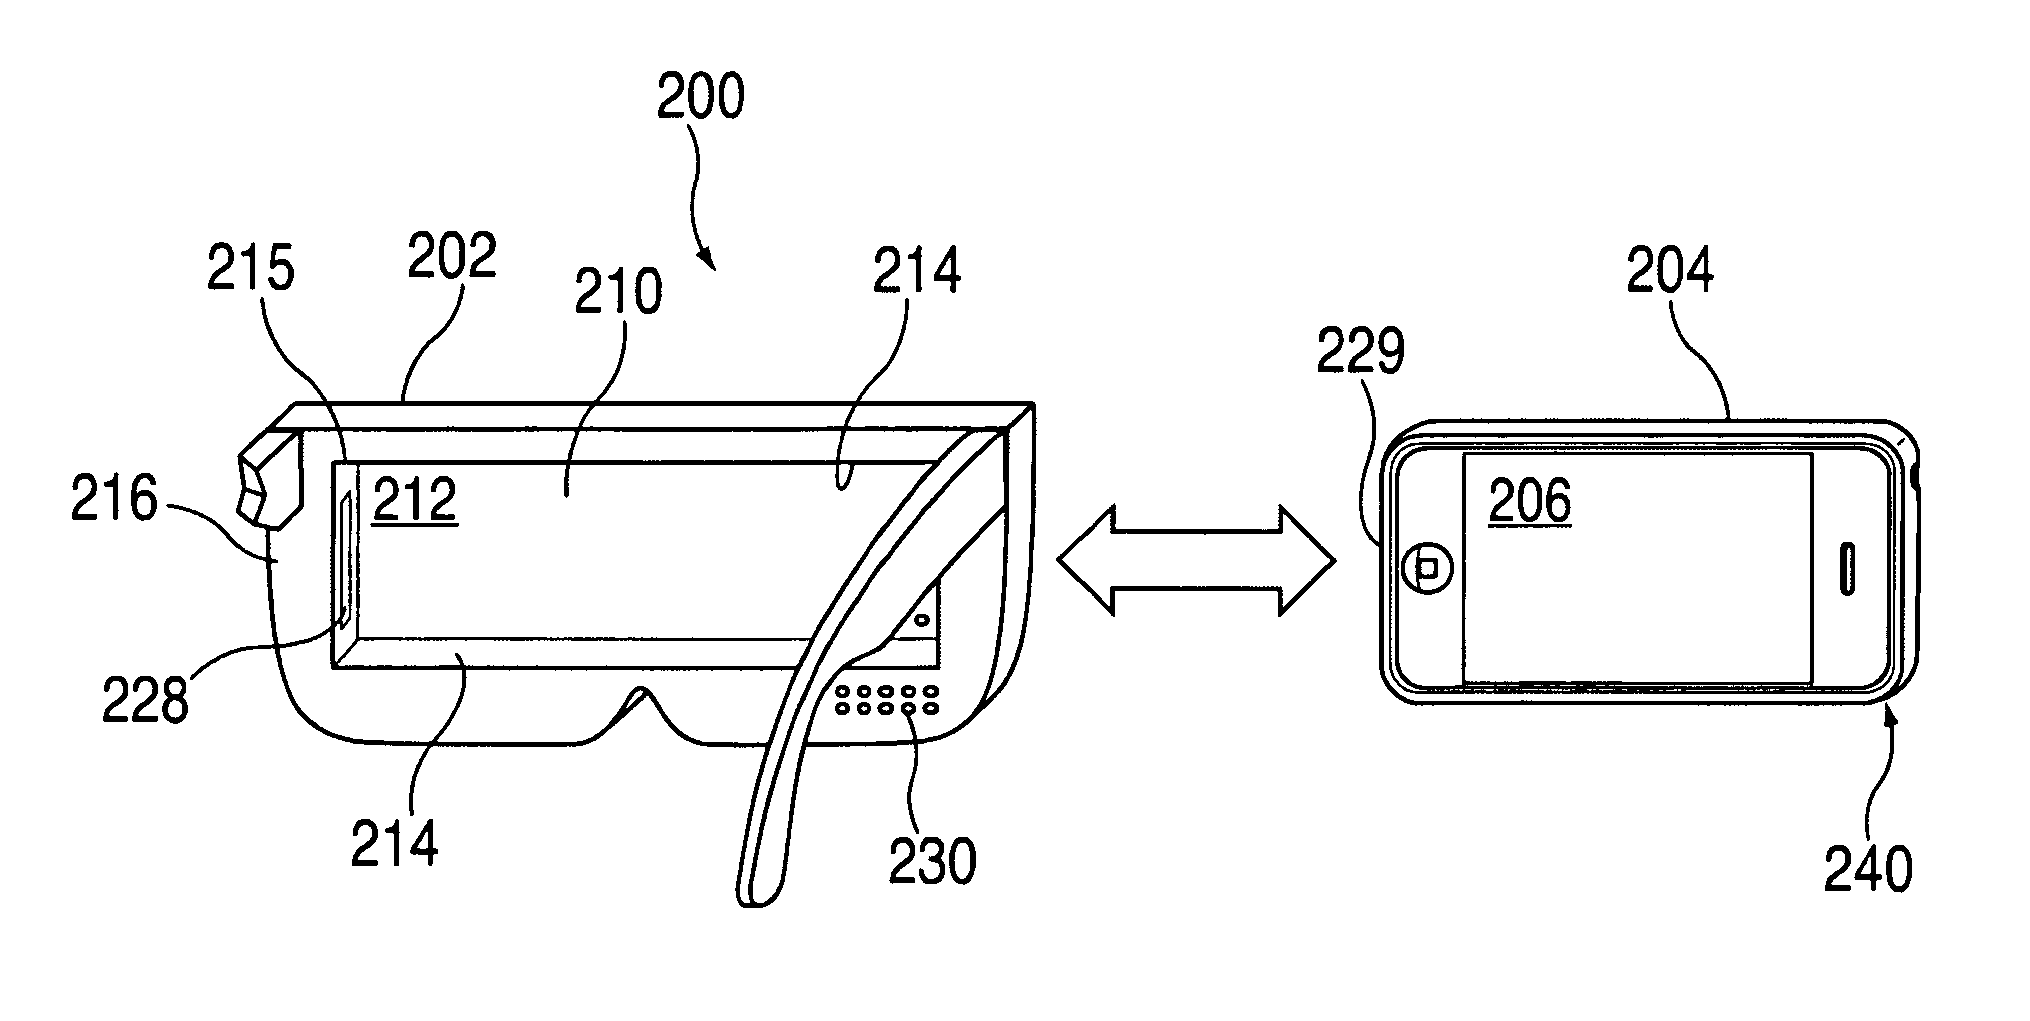 Head-mounted display apparatus for retaining a portable electronic device with display